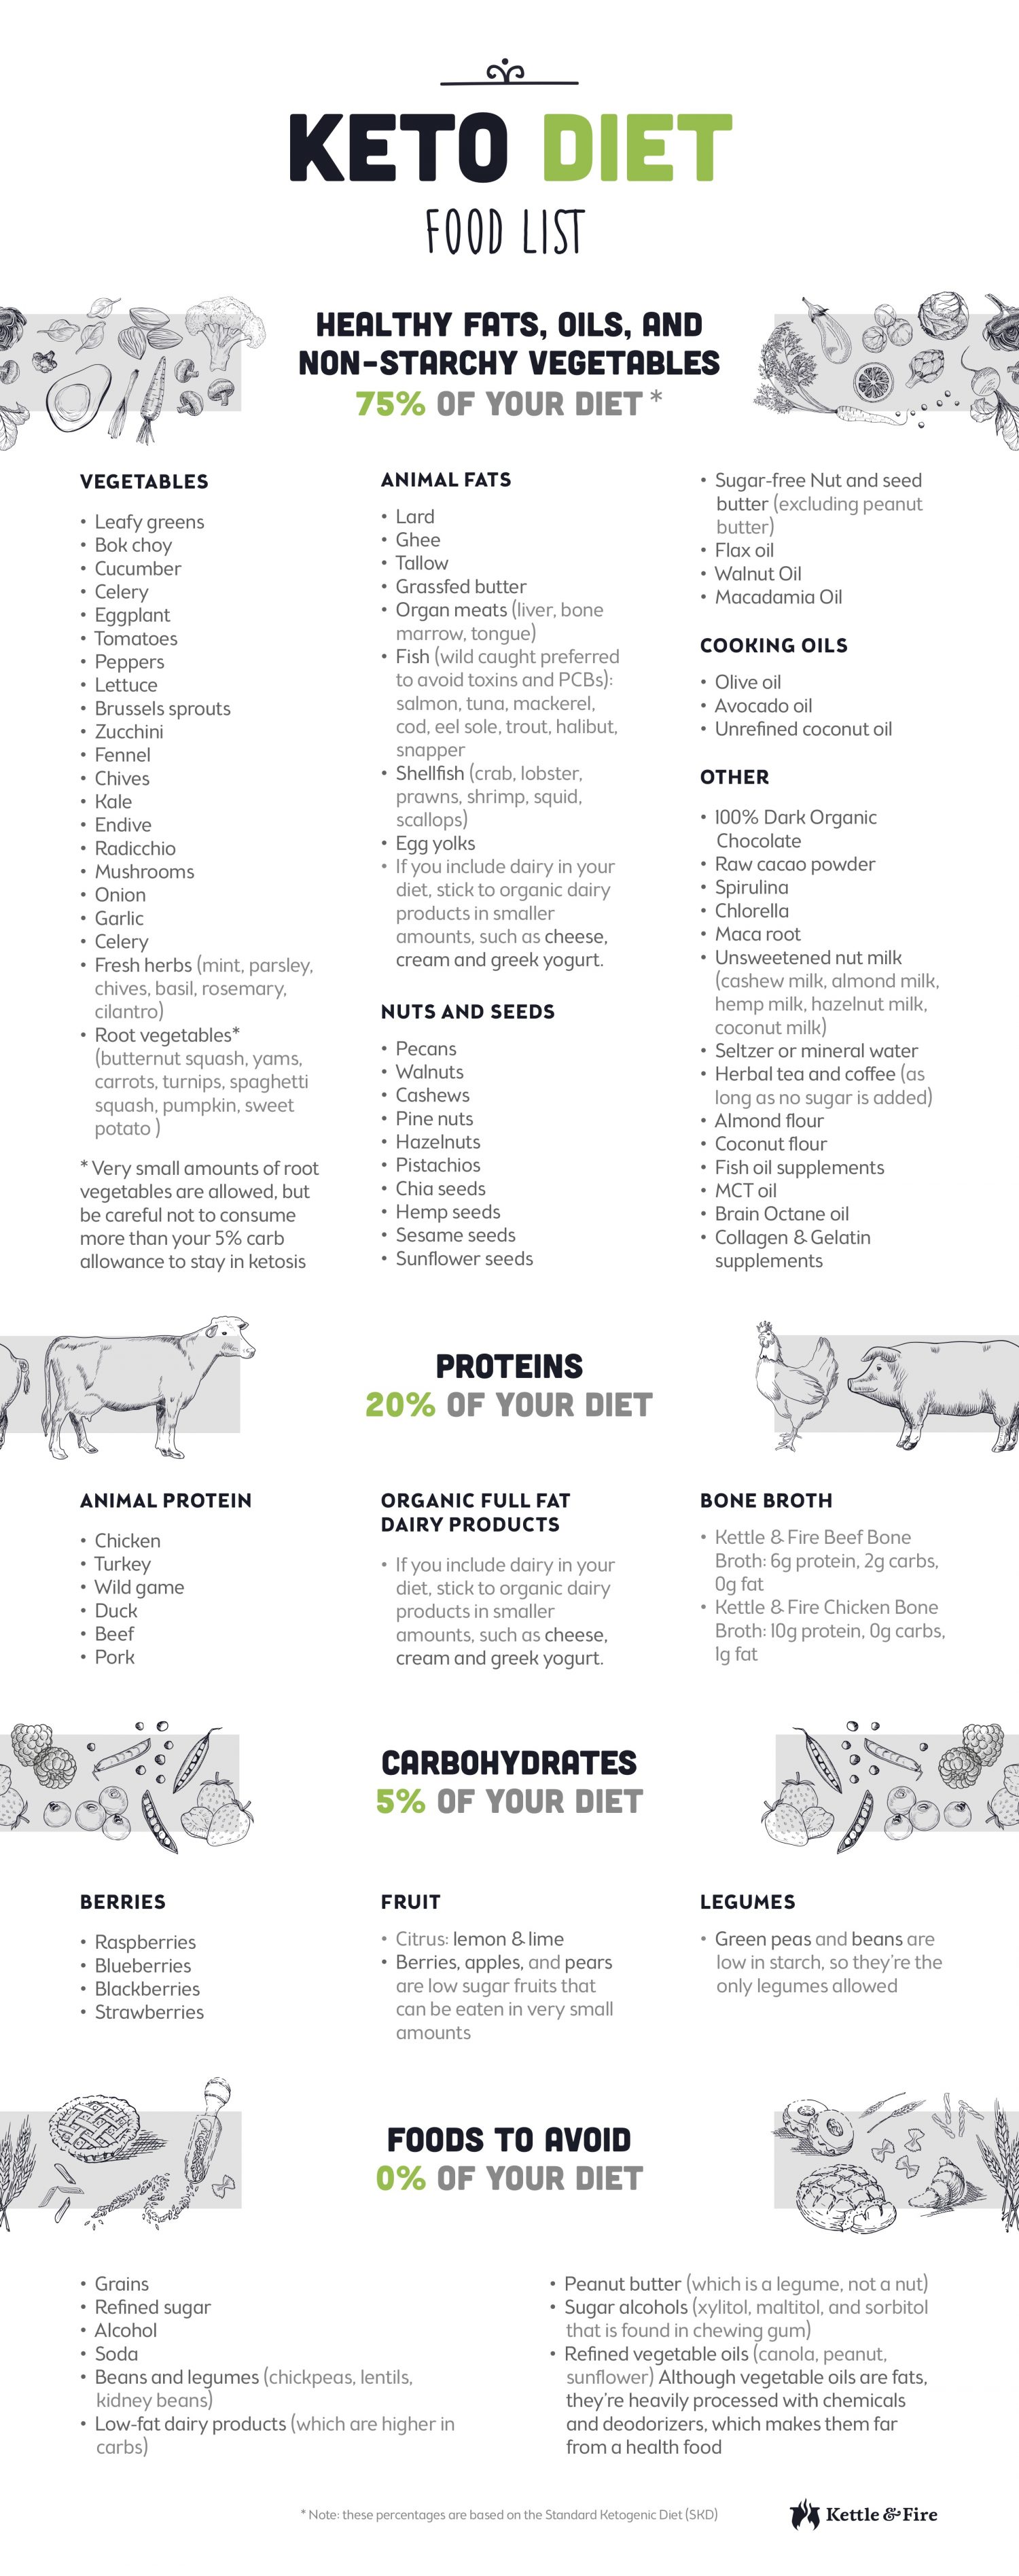 keto-diet-food-list-for-ultimate-fat-burning-perfect-keto-blog